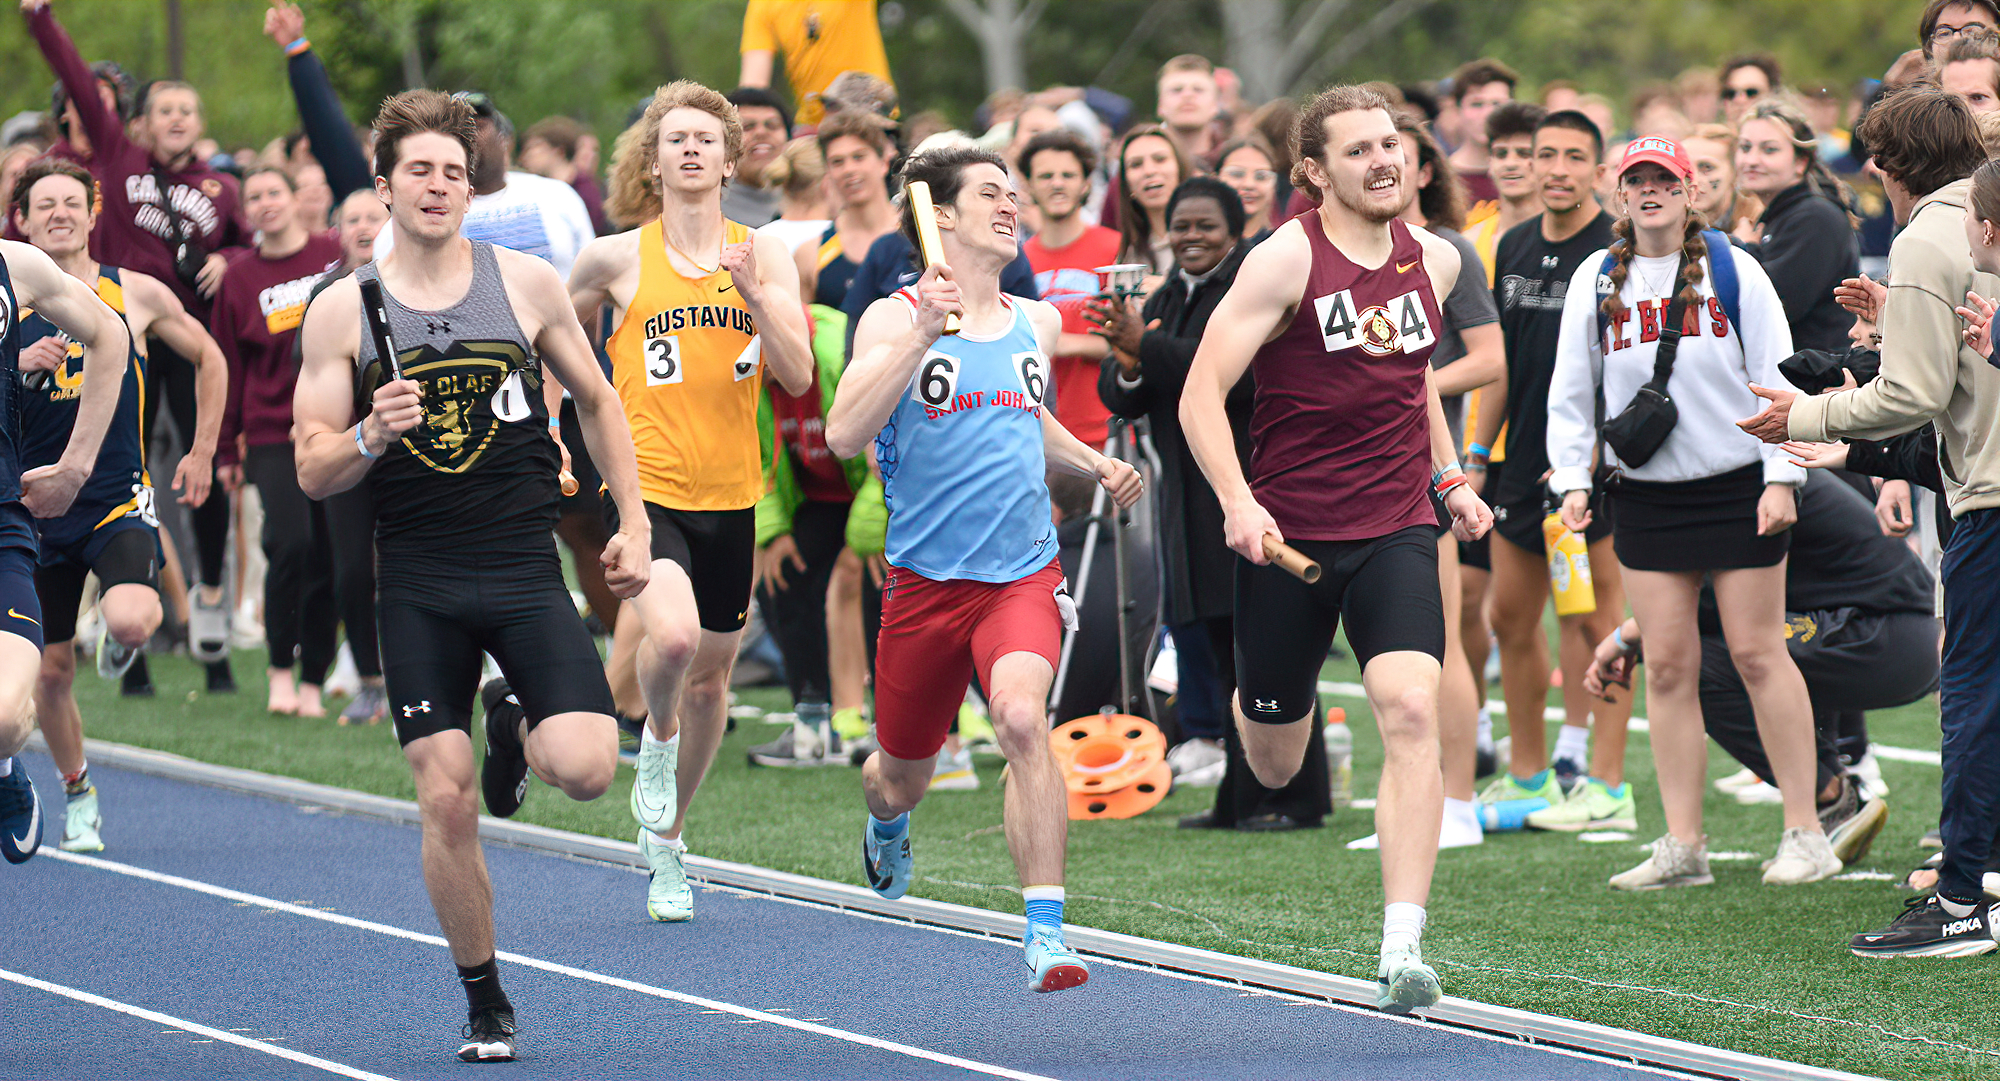 Hayden Gagnon (R) passes runners from Gustavus, St. John's and St. Olaf down the stretch of the 4x400-meter relay at the MIAC Meet.